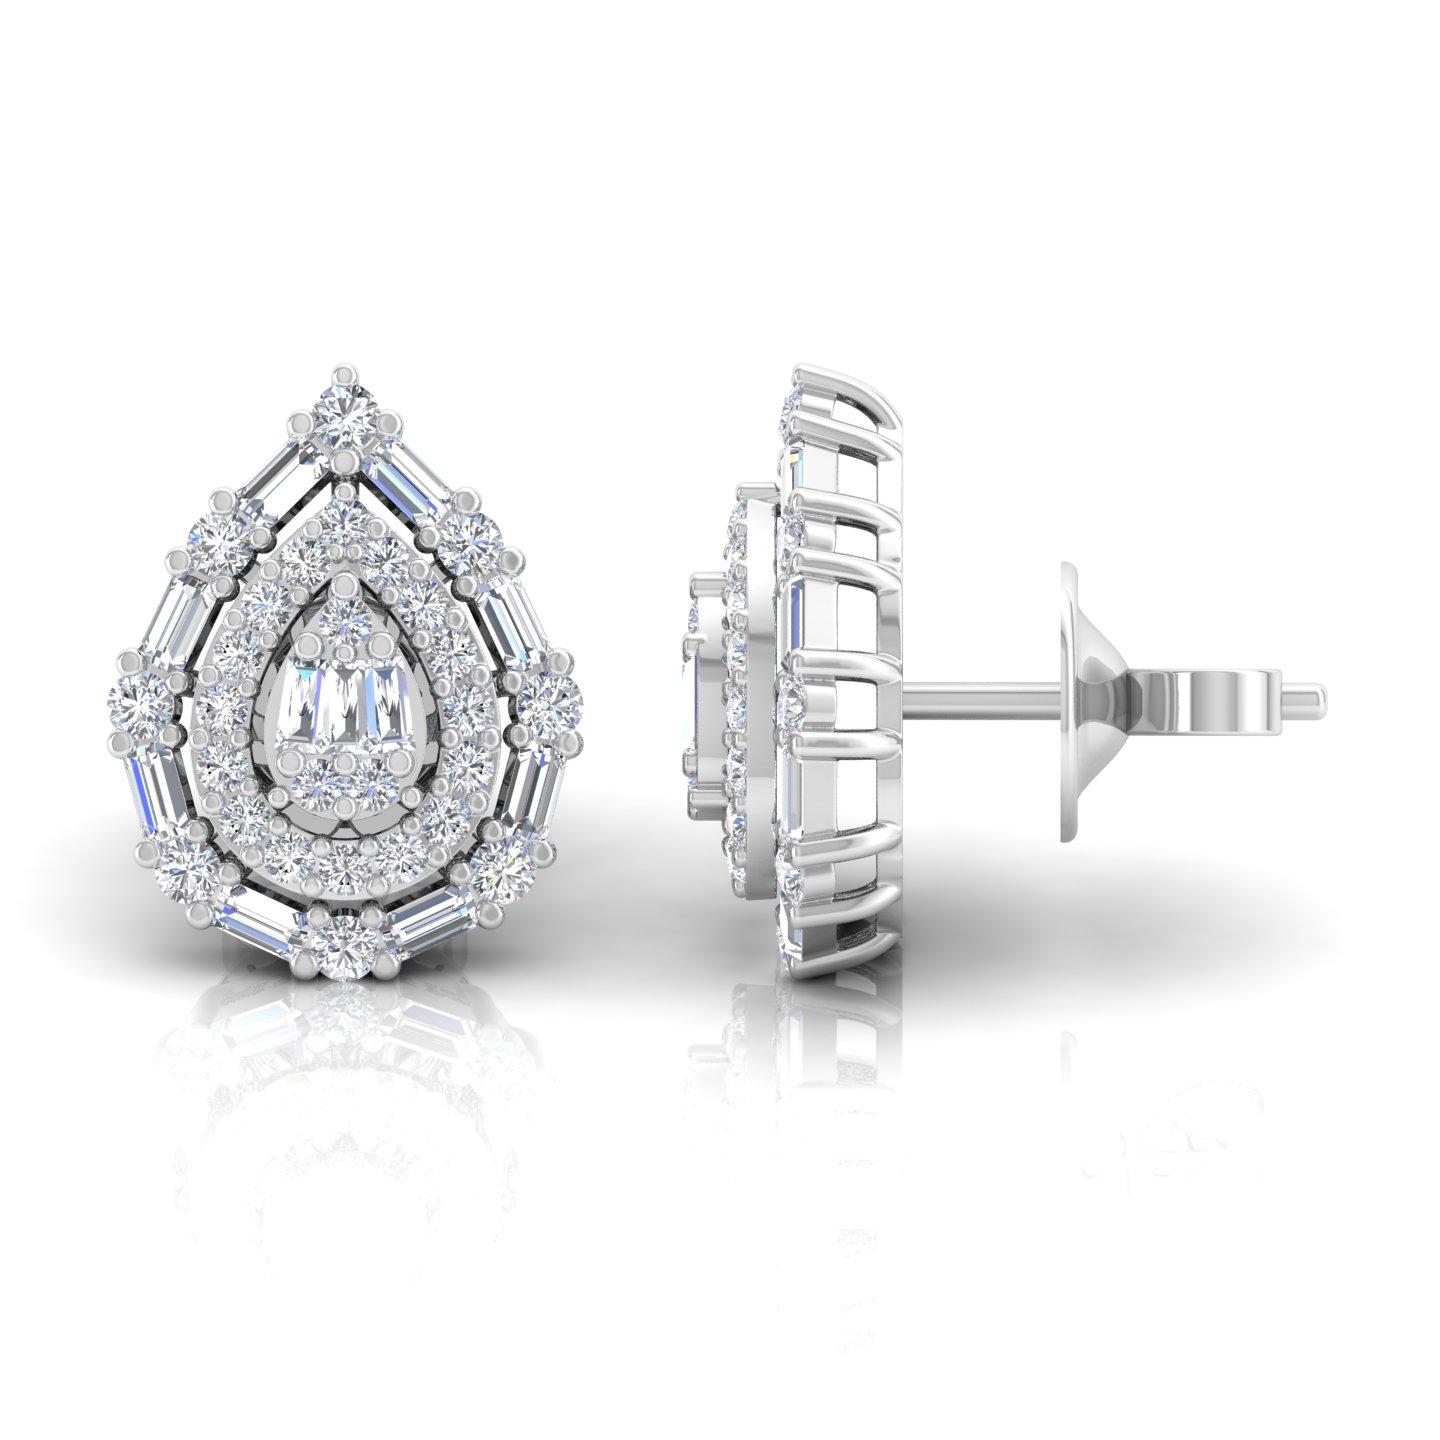 Item Code :- SJER1023
Gross Wt. :- 3.55 gm
18k White Gold Wt. :- 3.25 gm
Diamond Wt. :- 1.50 Ct. ( AVERAGE DIAMOND CLARITY SI1-SI2 & COLOR H-I )
Earrings Size :- 15.97 x 12.04 x 5.96 mm approx.

✦ Sizing
.....................
We can adjust most